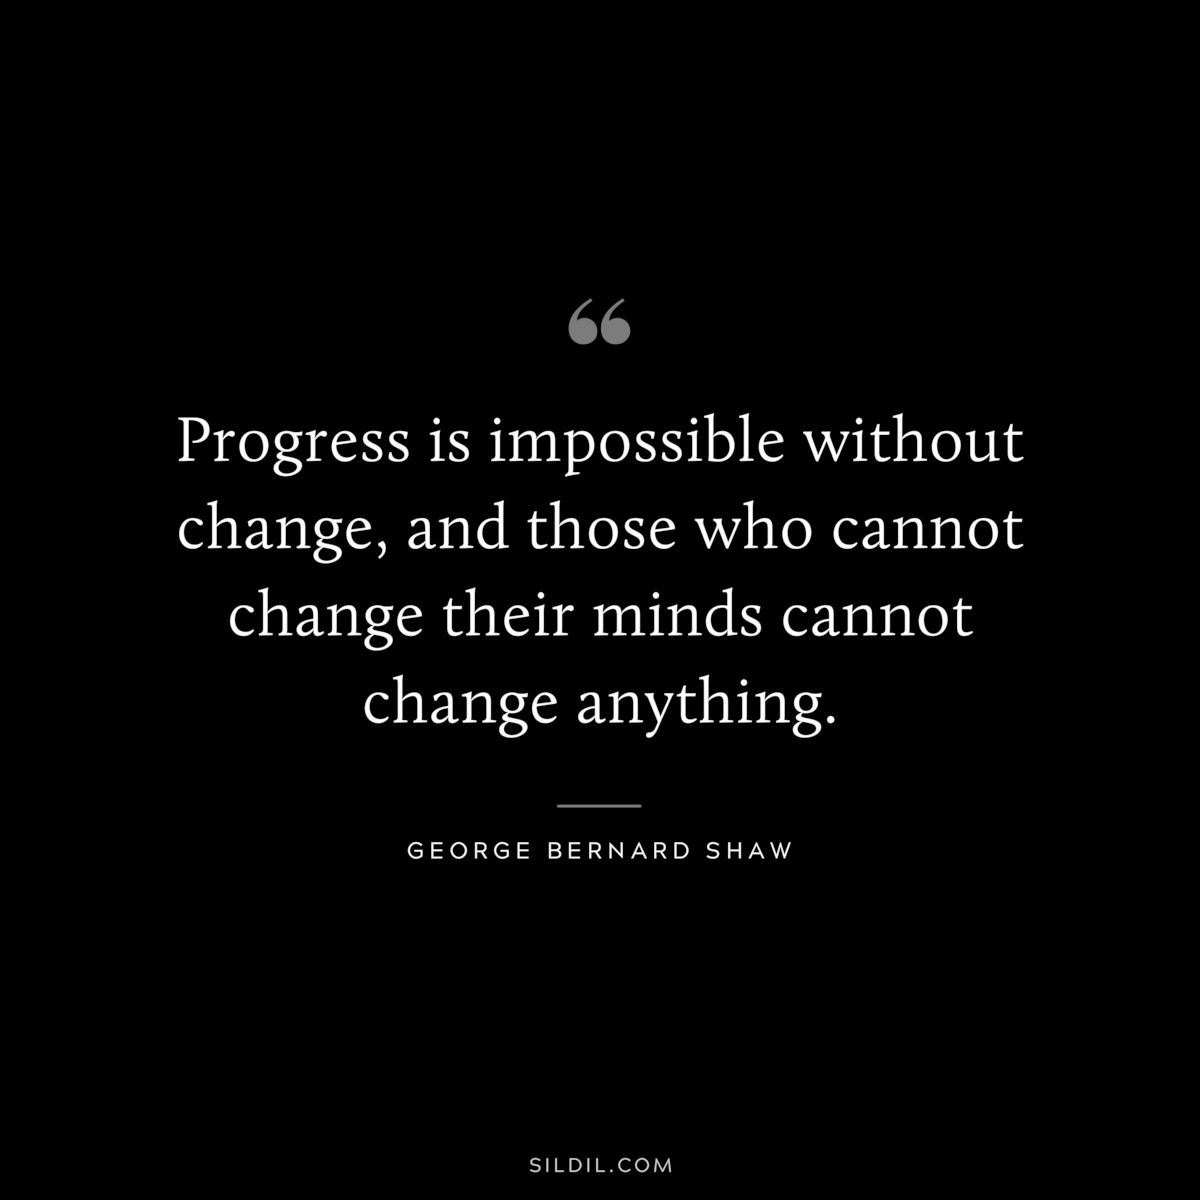 Progress is impossible without change, and those who cannot change their minds cannot change anything. ― George Bernard Shaw